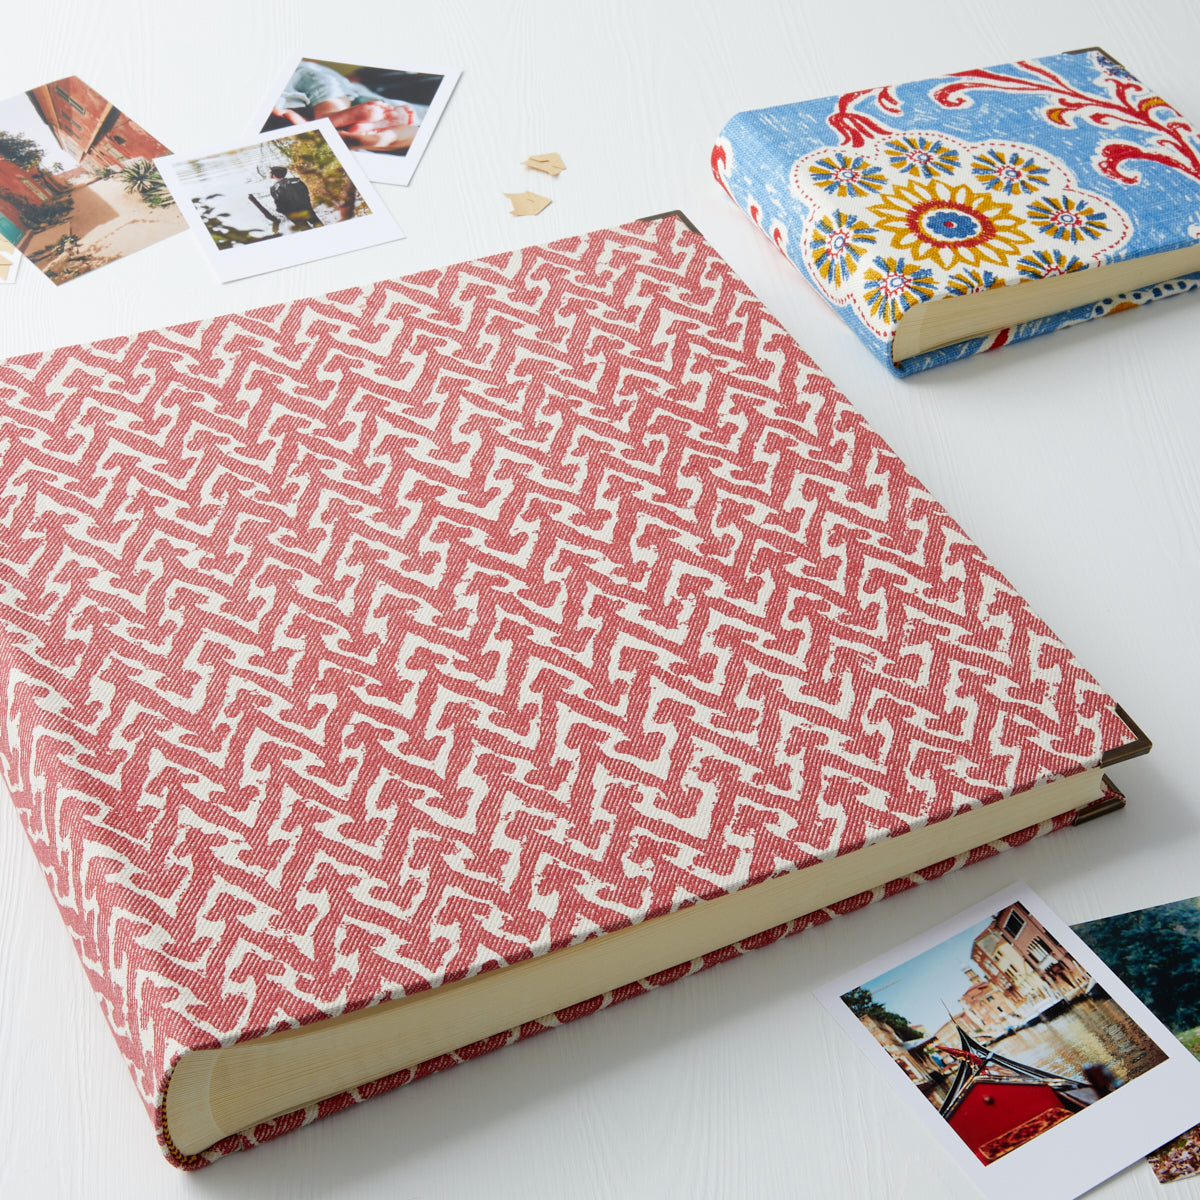 Send Your Own Fabric Photo Albums